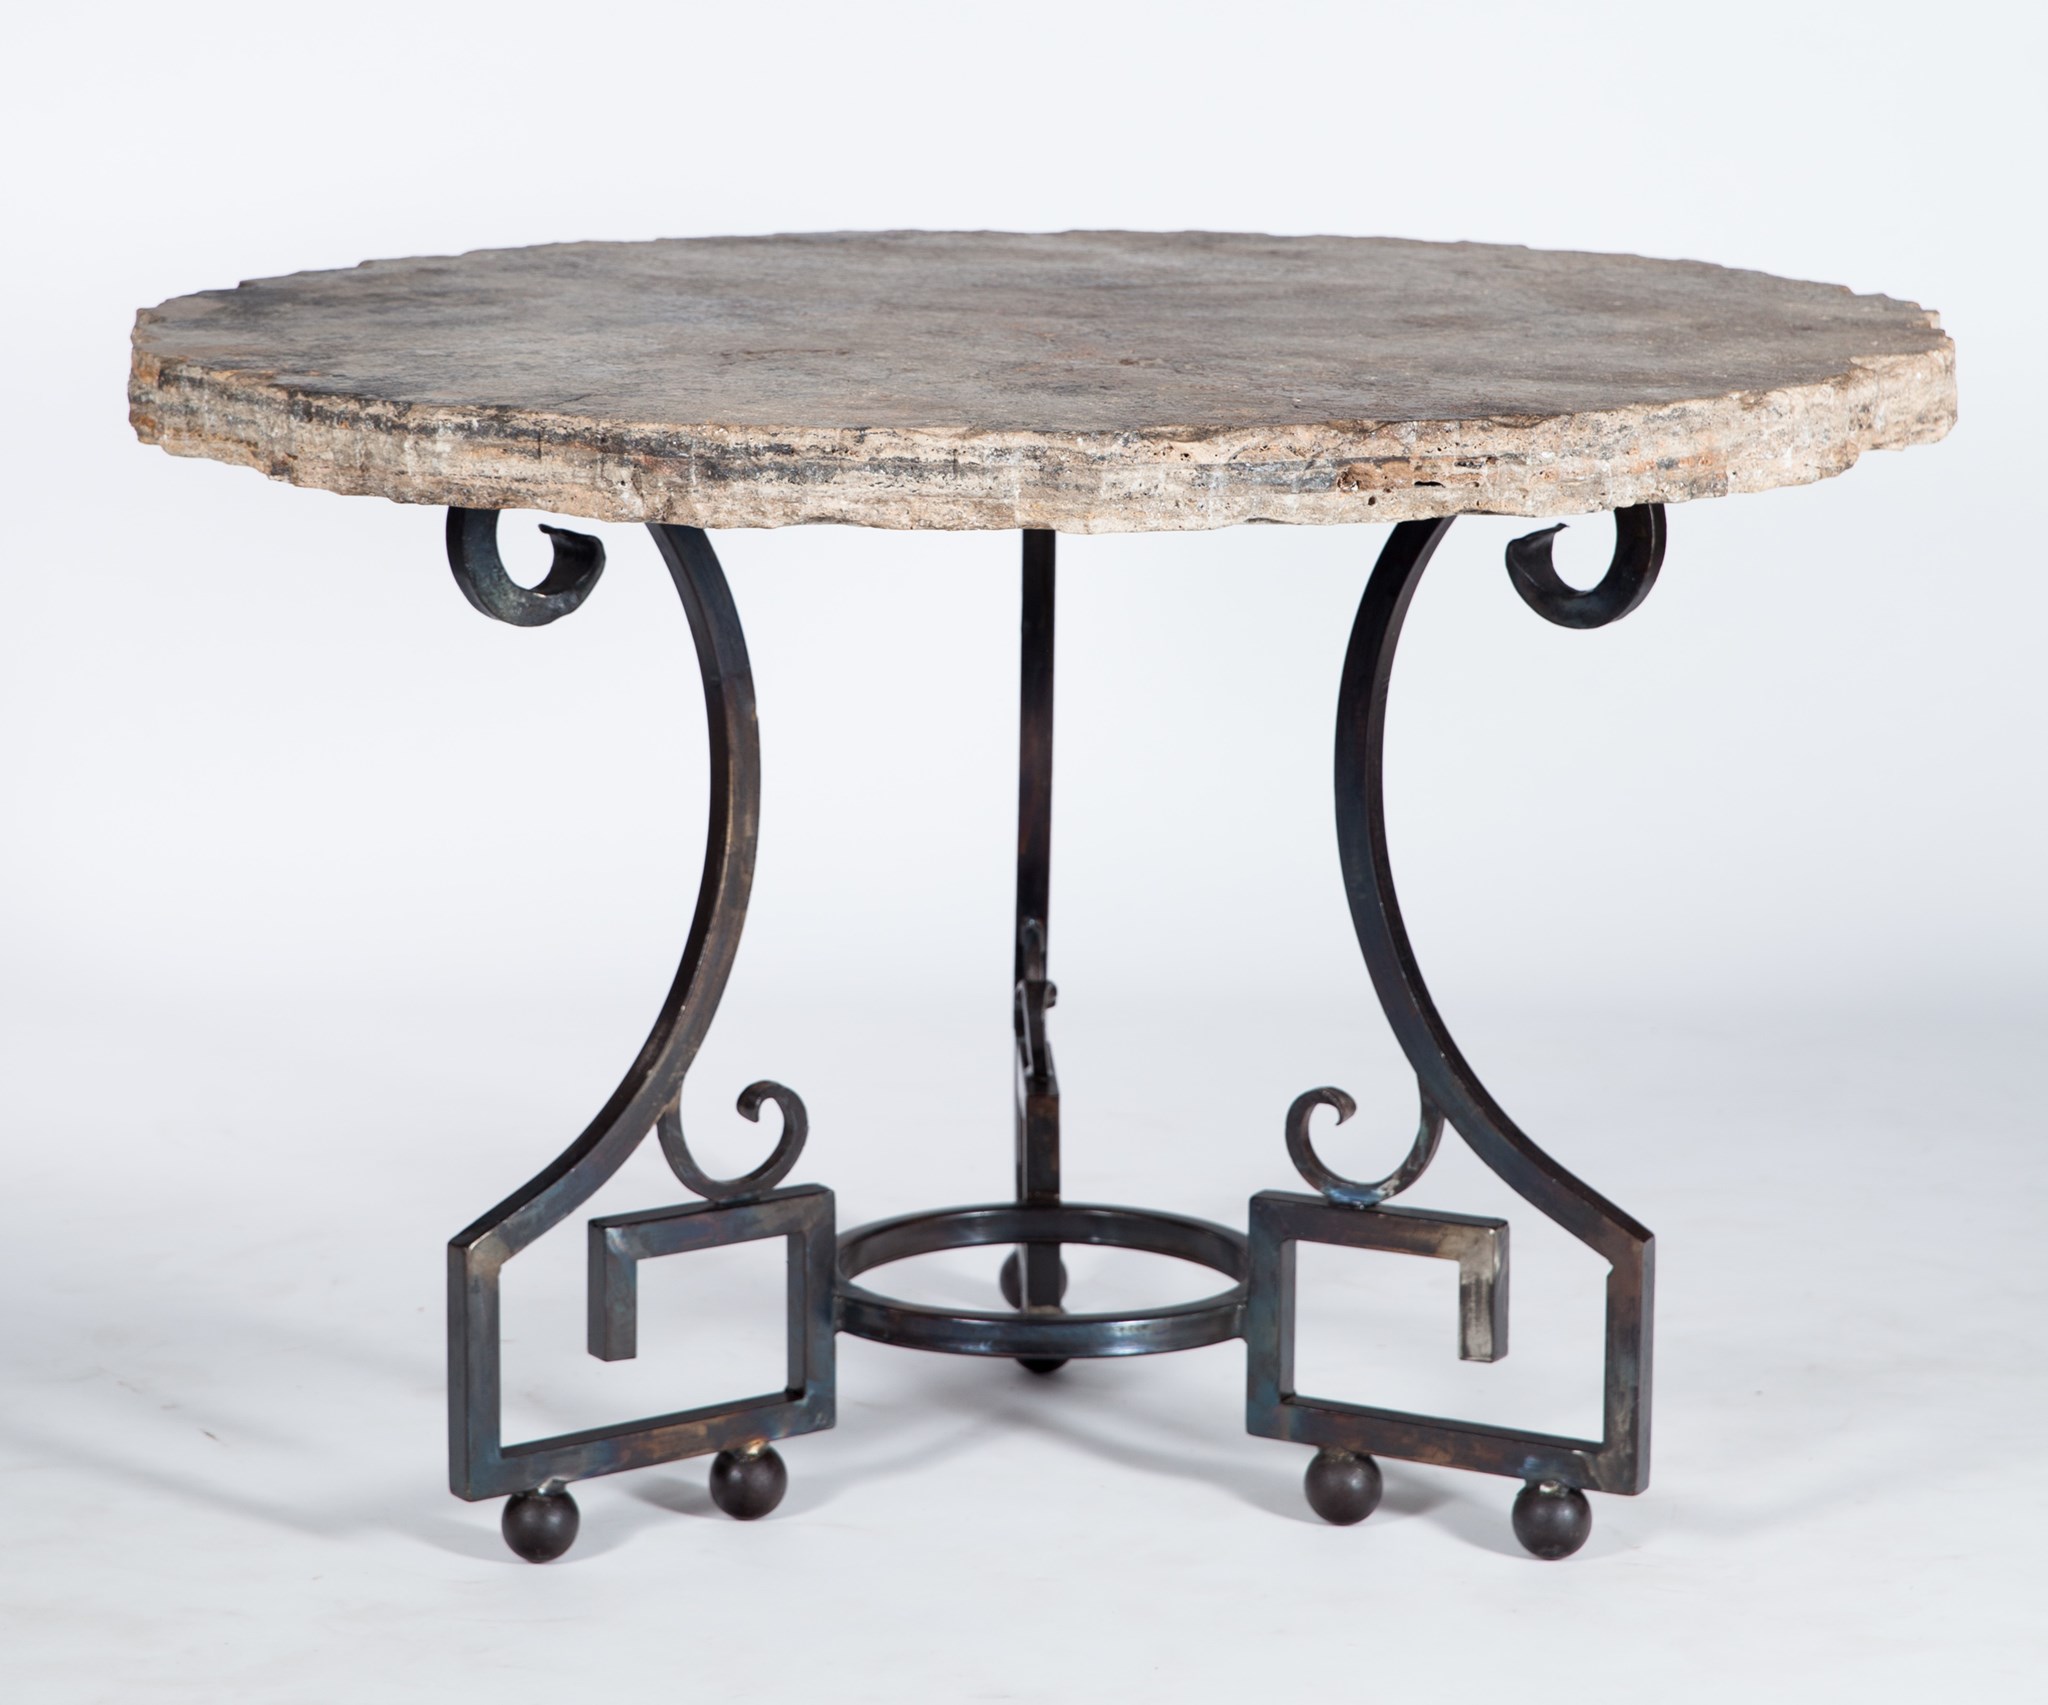 Kingsley Dining Table With 48 Round Live Edge Marble Top Boulevard Urban Living